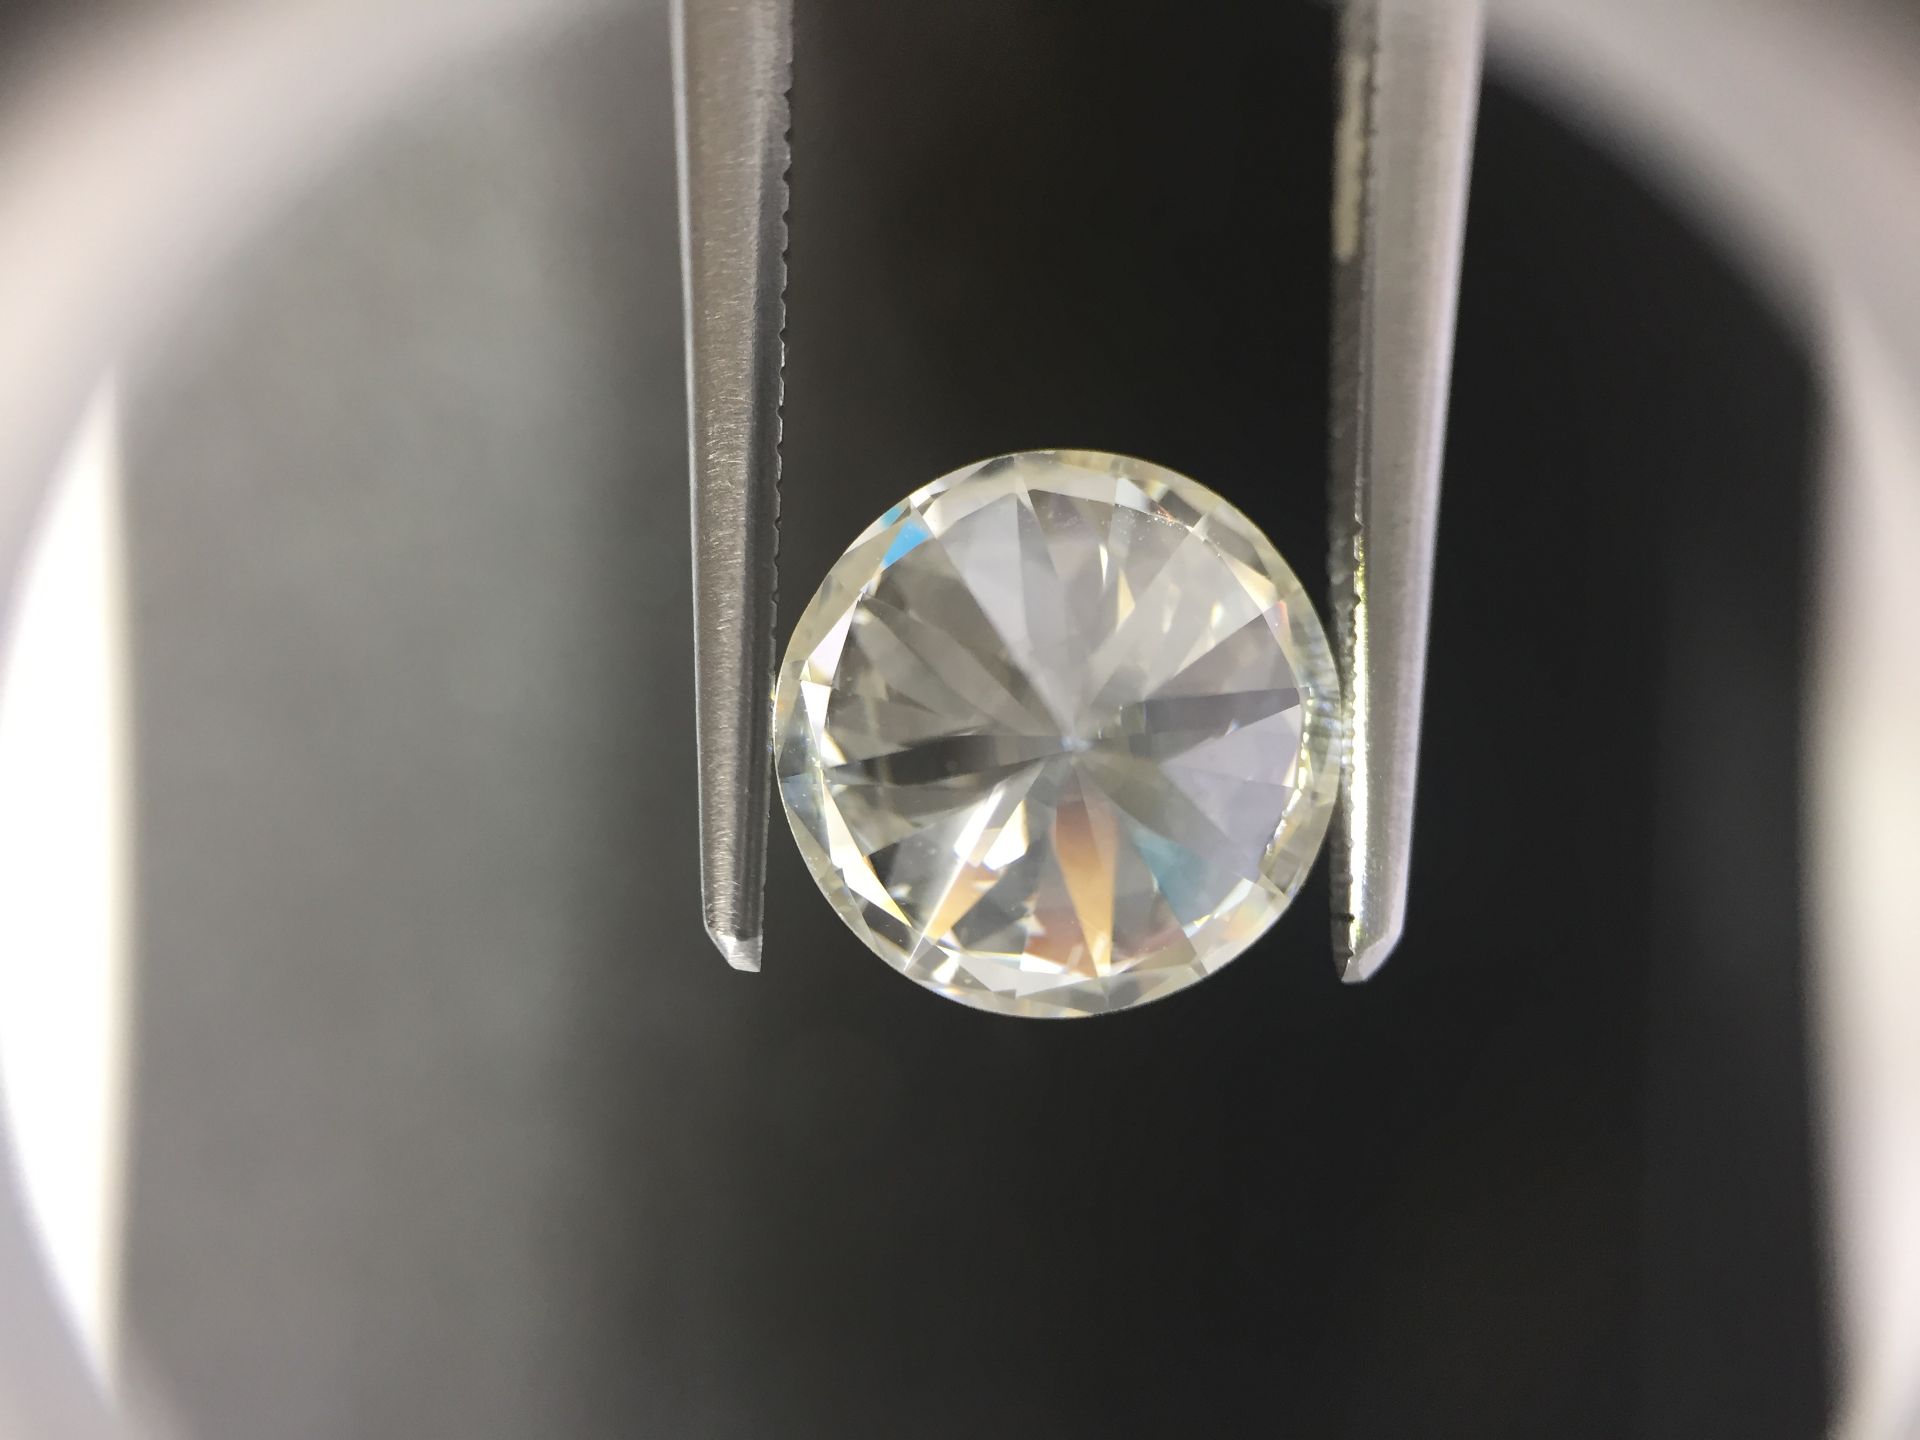 2.00ct brilliant cut diamond. G colour, VVS2 clarity. No certification. Can be used for ring or - Image 2 of 4